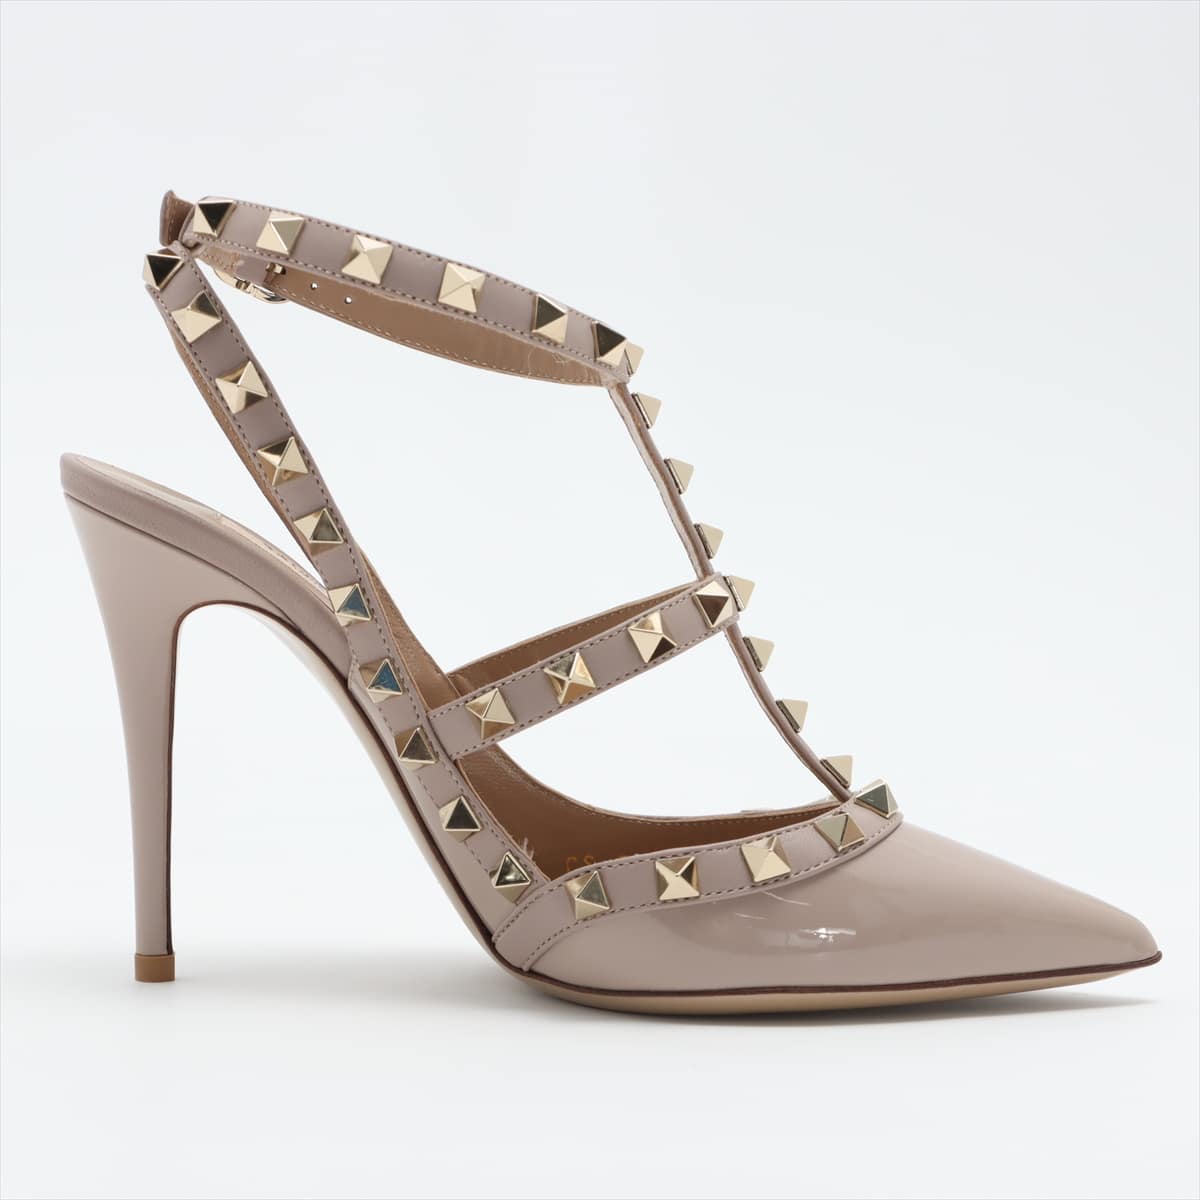 Valentino Garavani Patent leather Pumps 36 Ladies' Beige Rock Studs 2 spare studs There is a lift change ZW2S0393